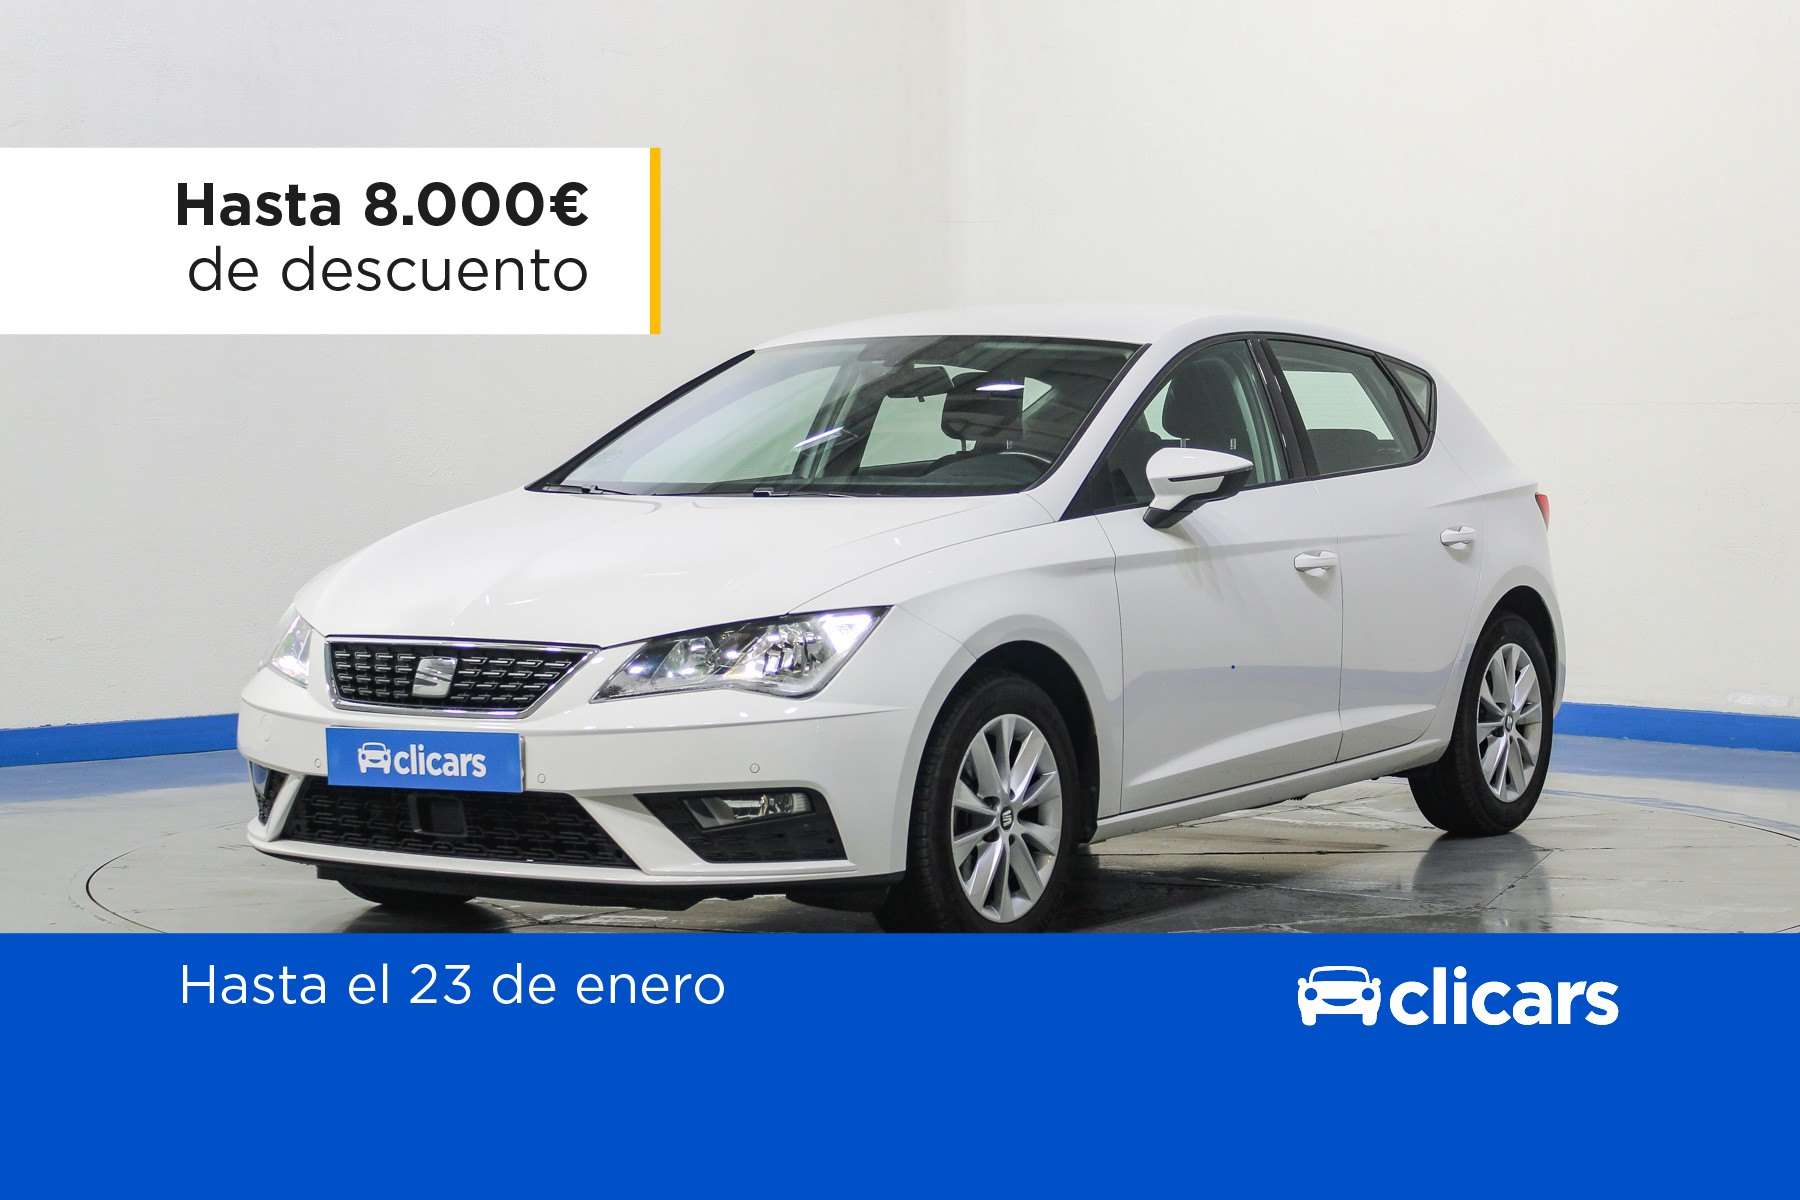 SEAT Leon Station wagon in White used in MALAGA for € 12,290.-